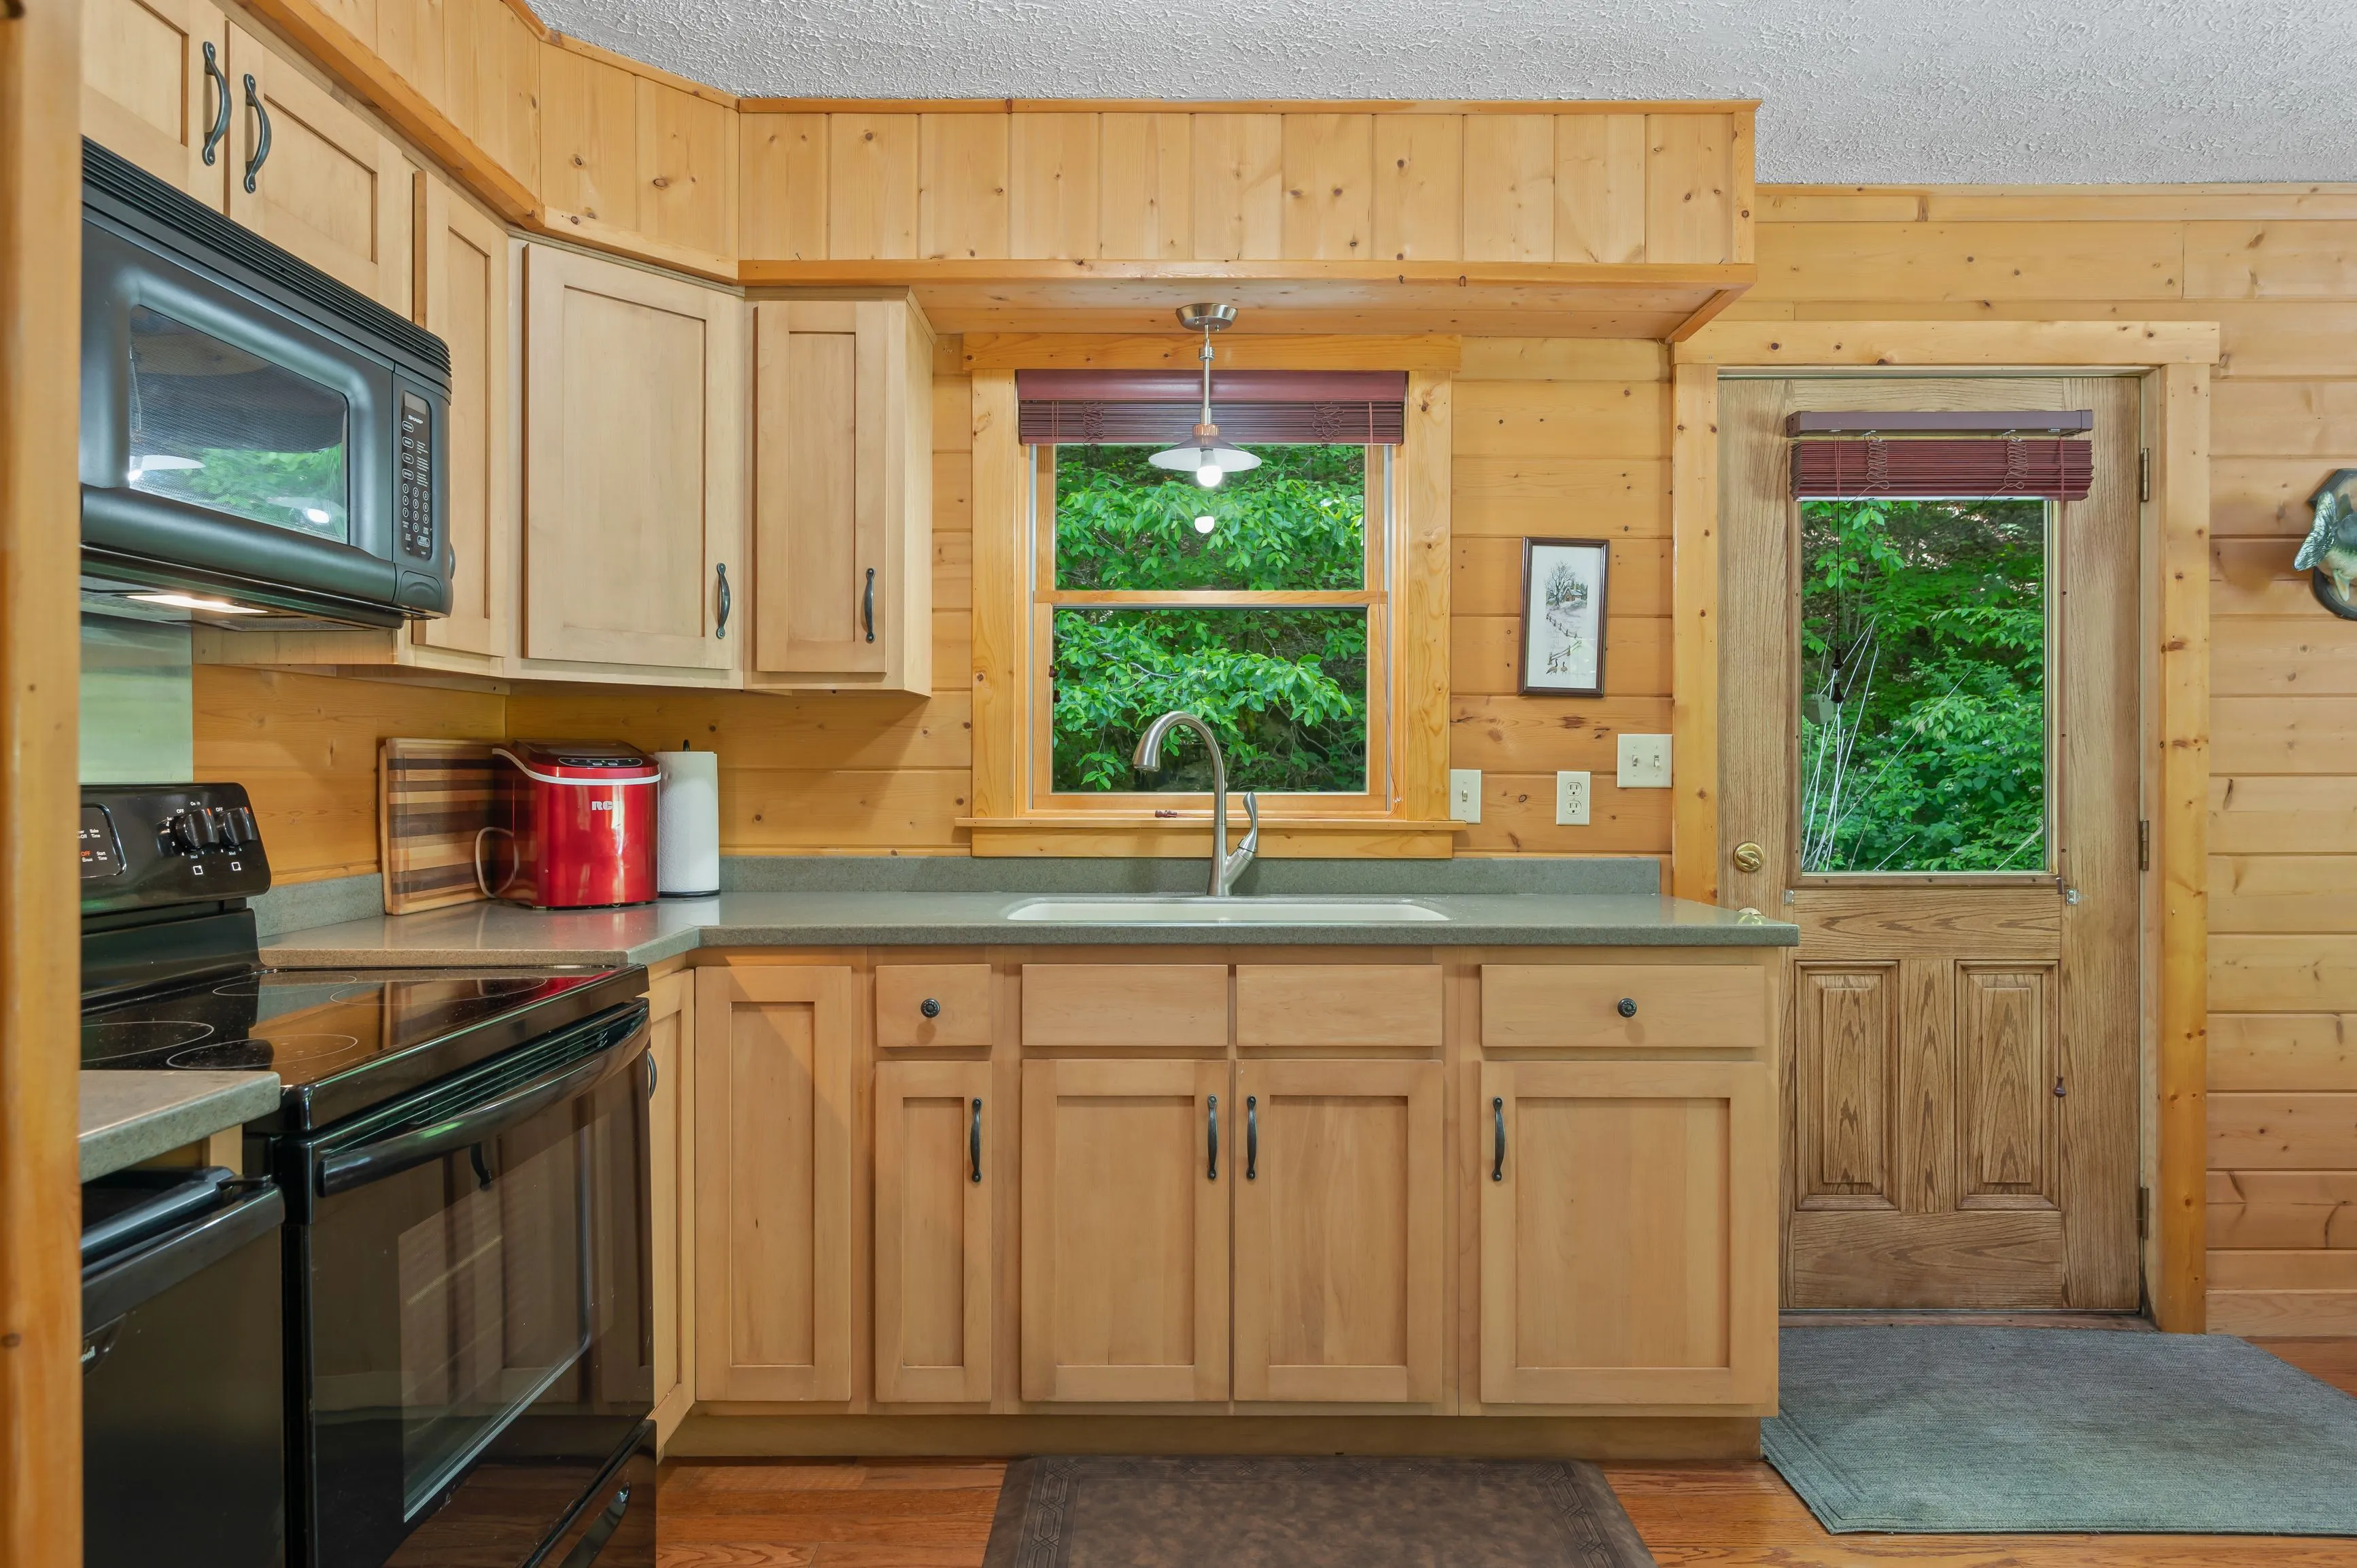 Cozy wooden kitchen interior with cabinets, countertops, and a window view of green foliage.